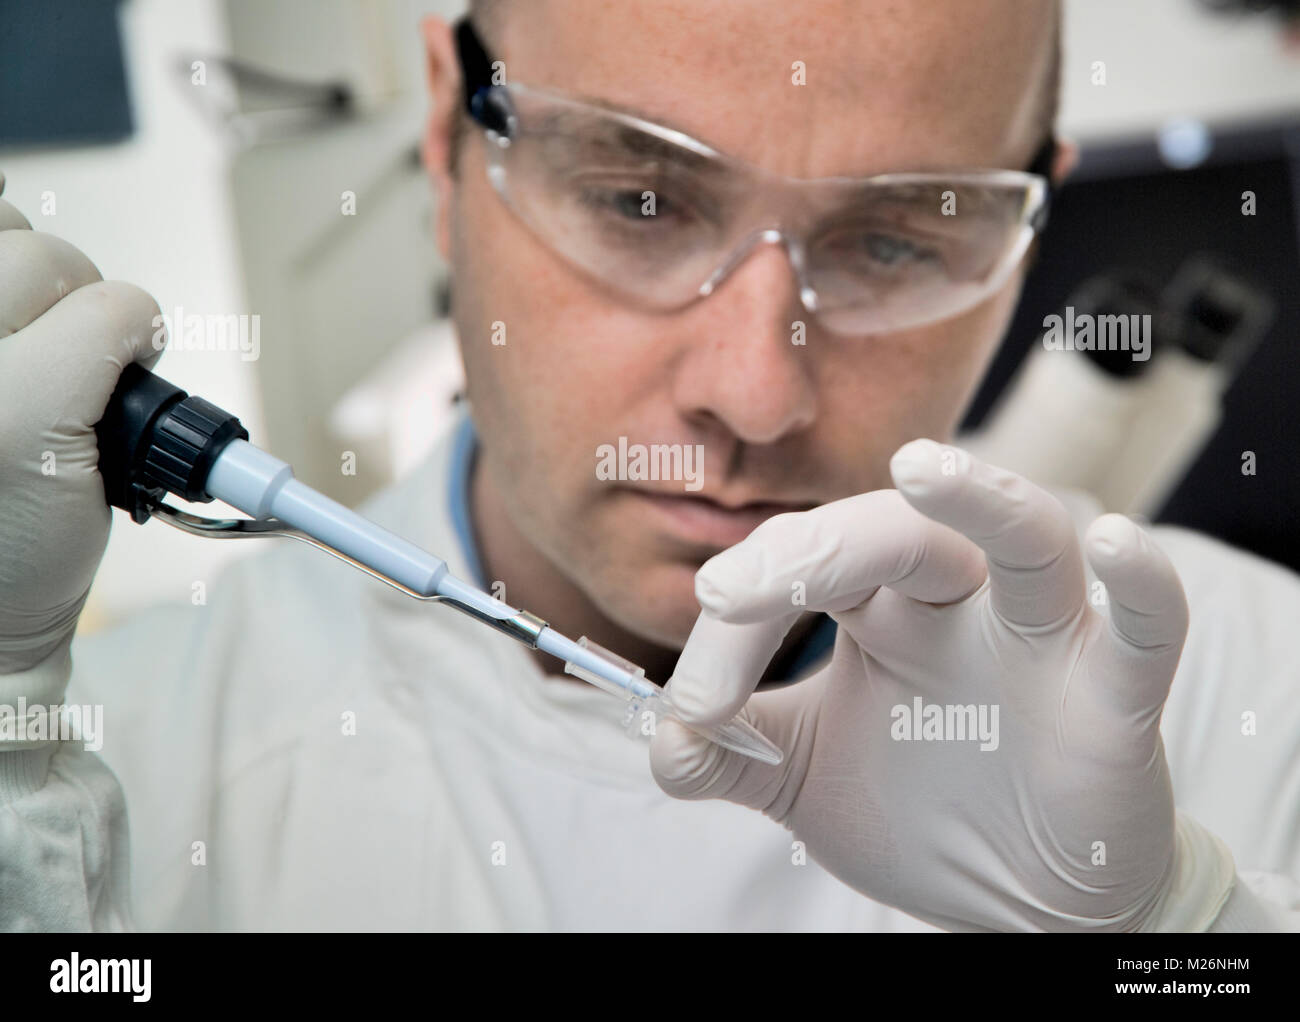 Scientist in laboratory using a micro-pipette to transfer accurately measured amount of liquid to a test tube. Stock Photo